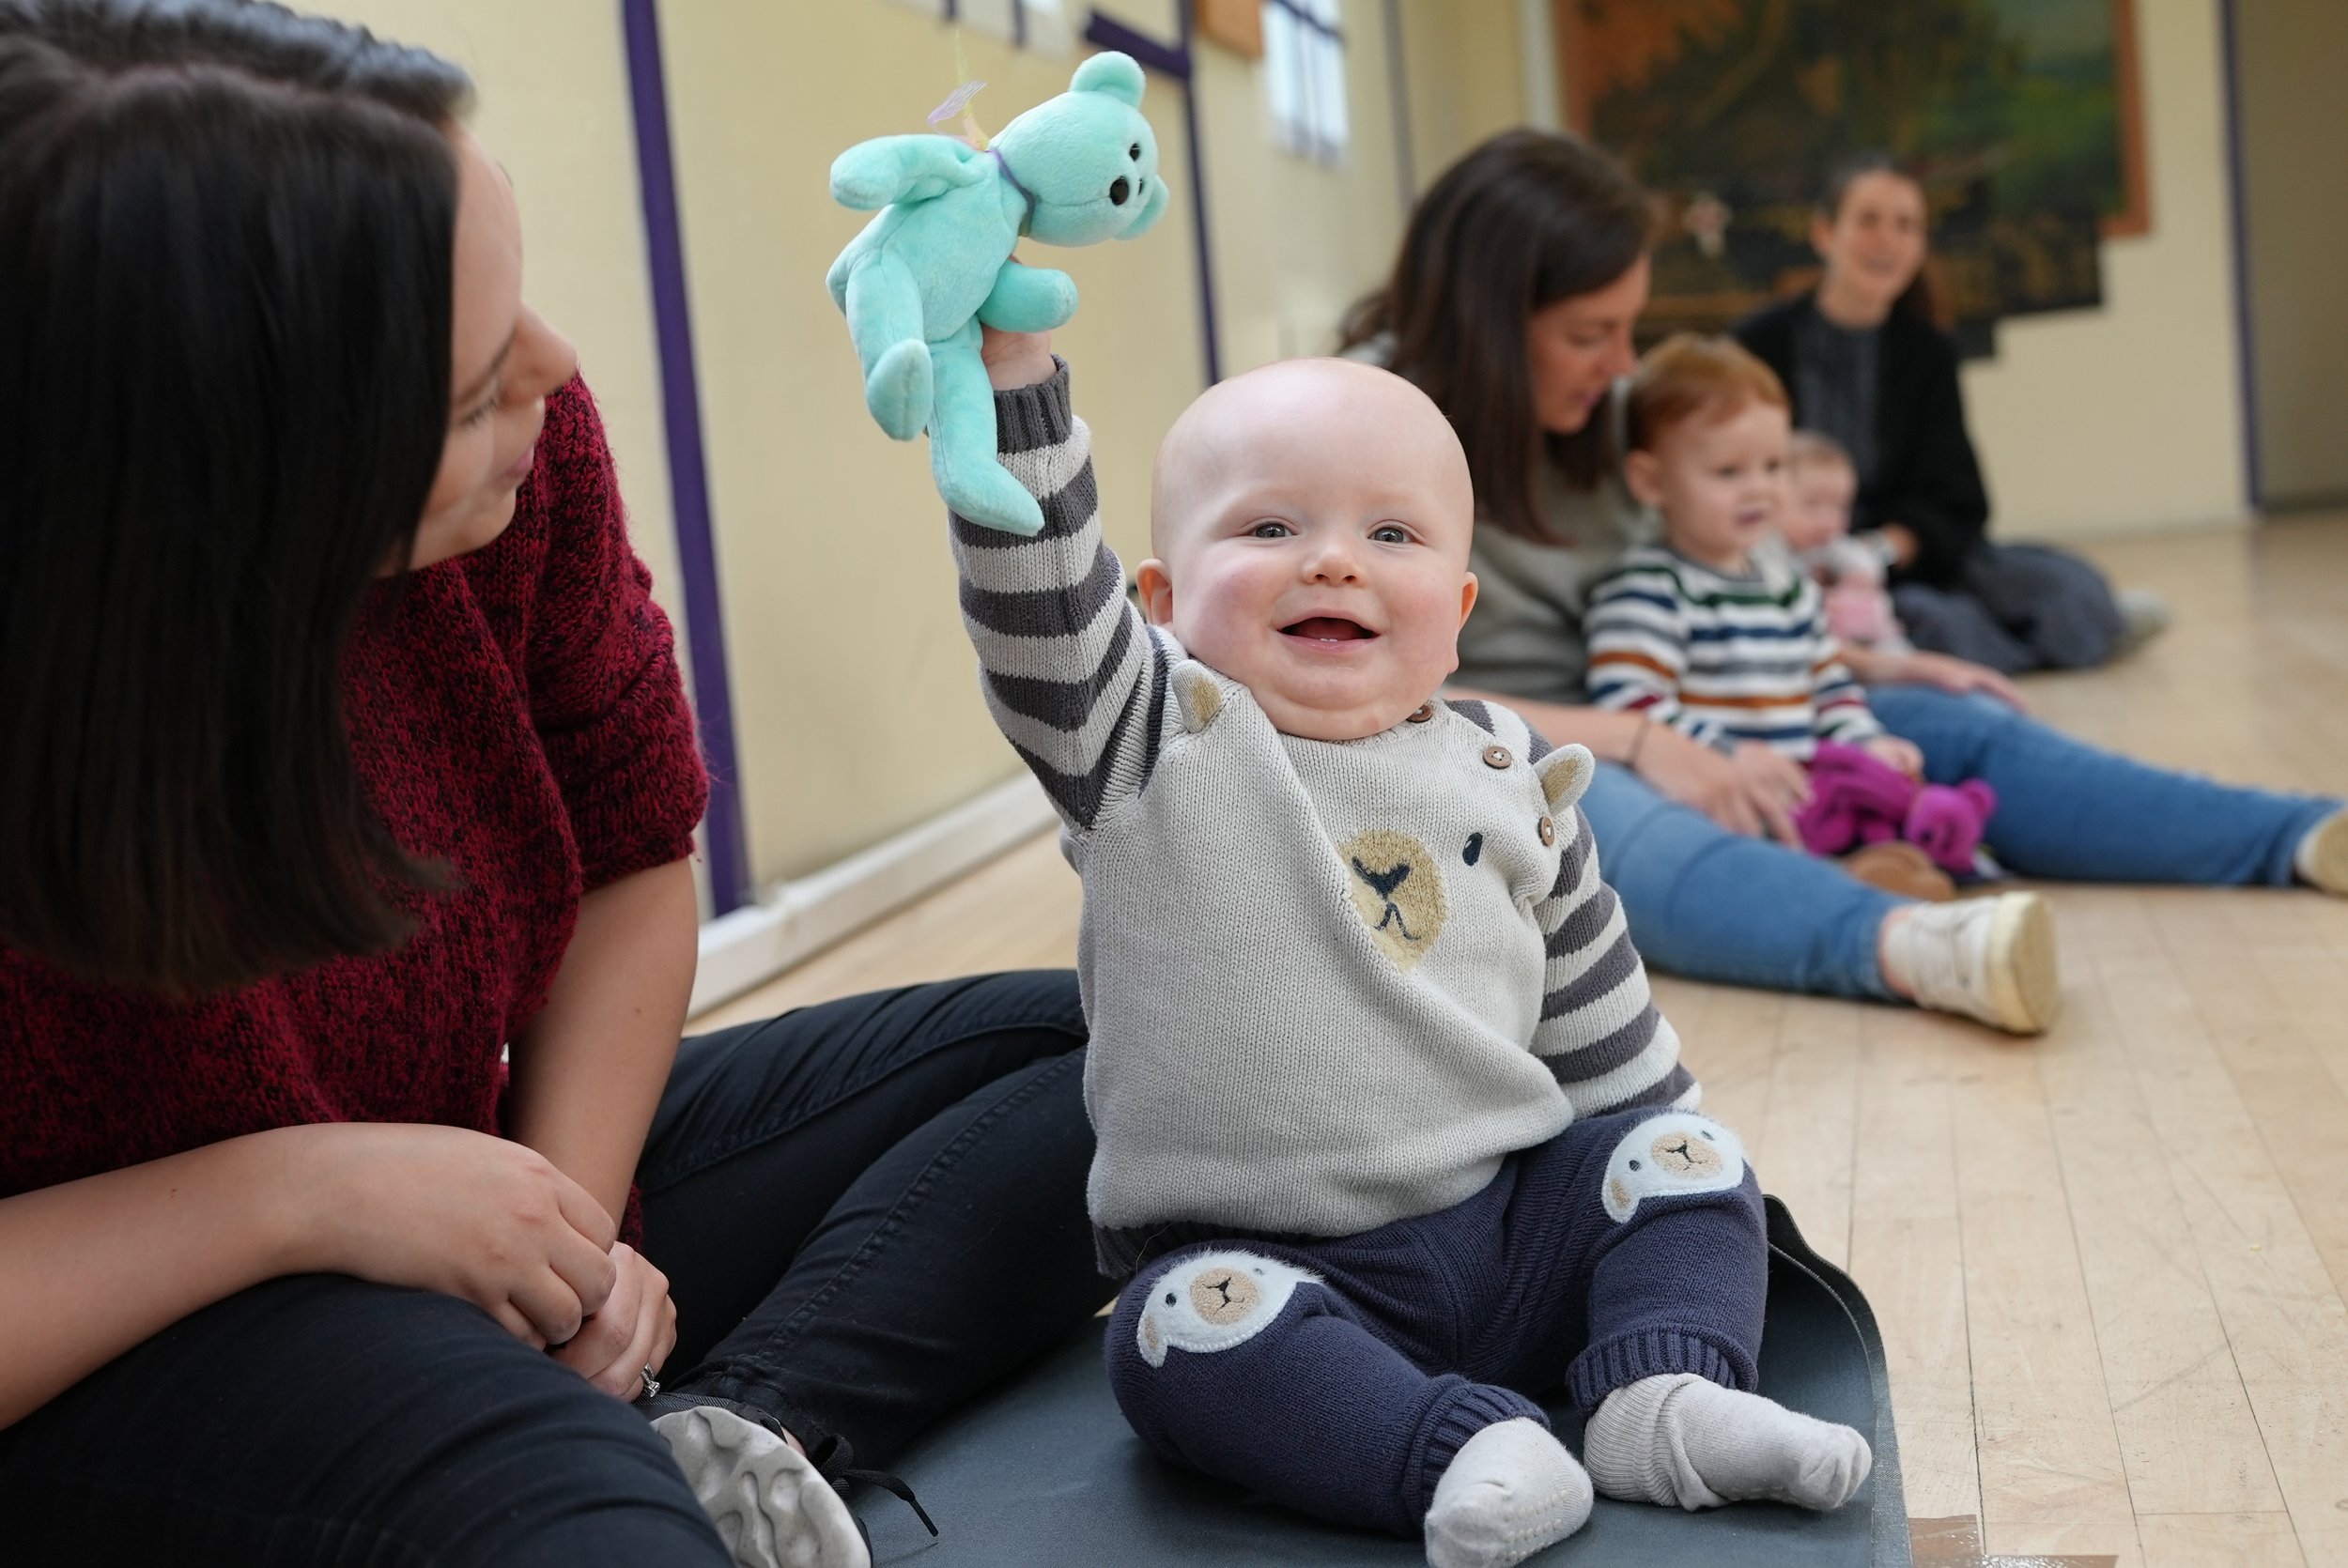  Little boy is smiling and holding up a blue teddy. Mum is sitting next to her baby smiling 